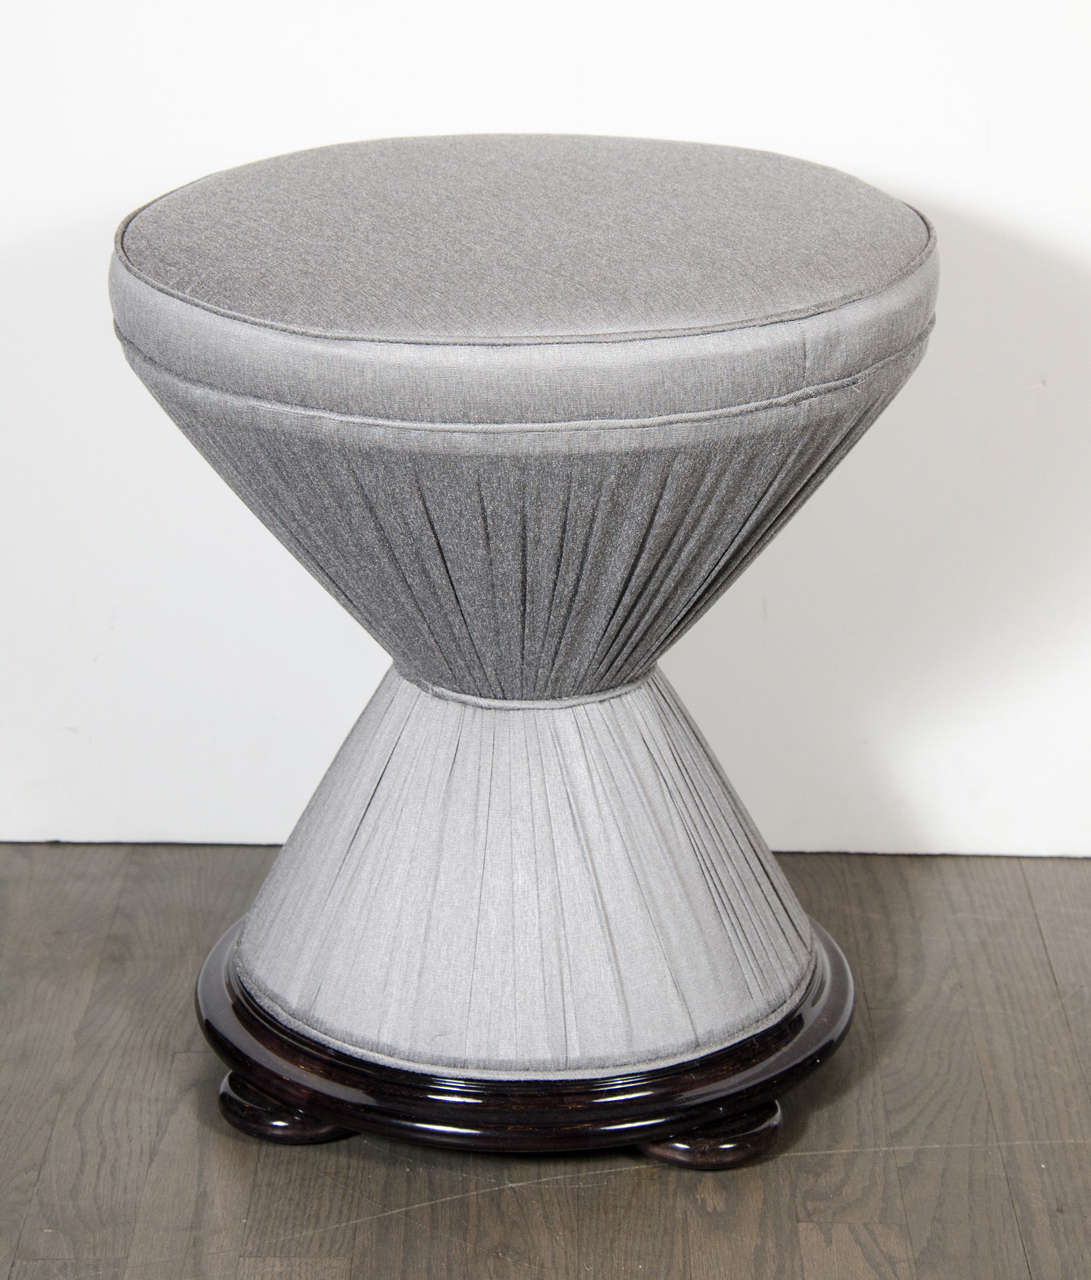 This exquisite stool has been newly upholstered in a sharkskin platinum upholstery with a stepped base of ebonized walnut. This stool has been mint restored.